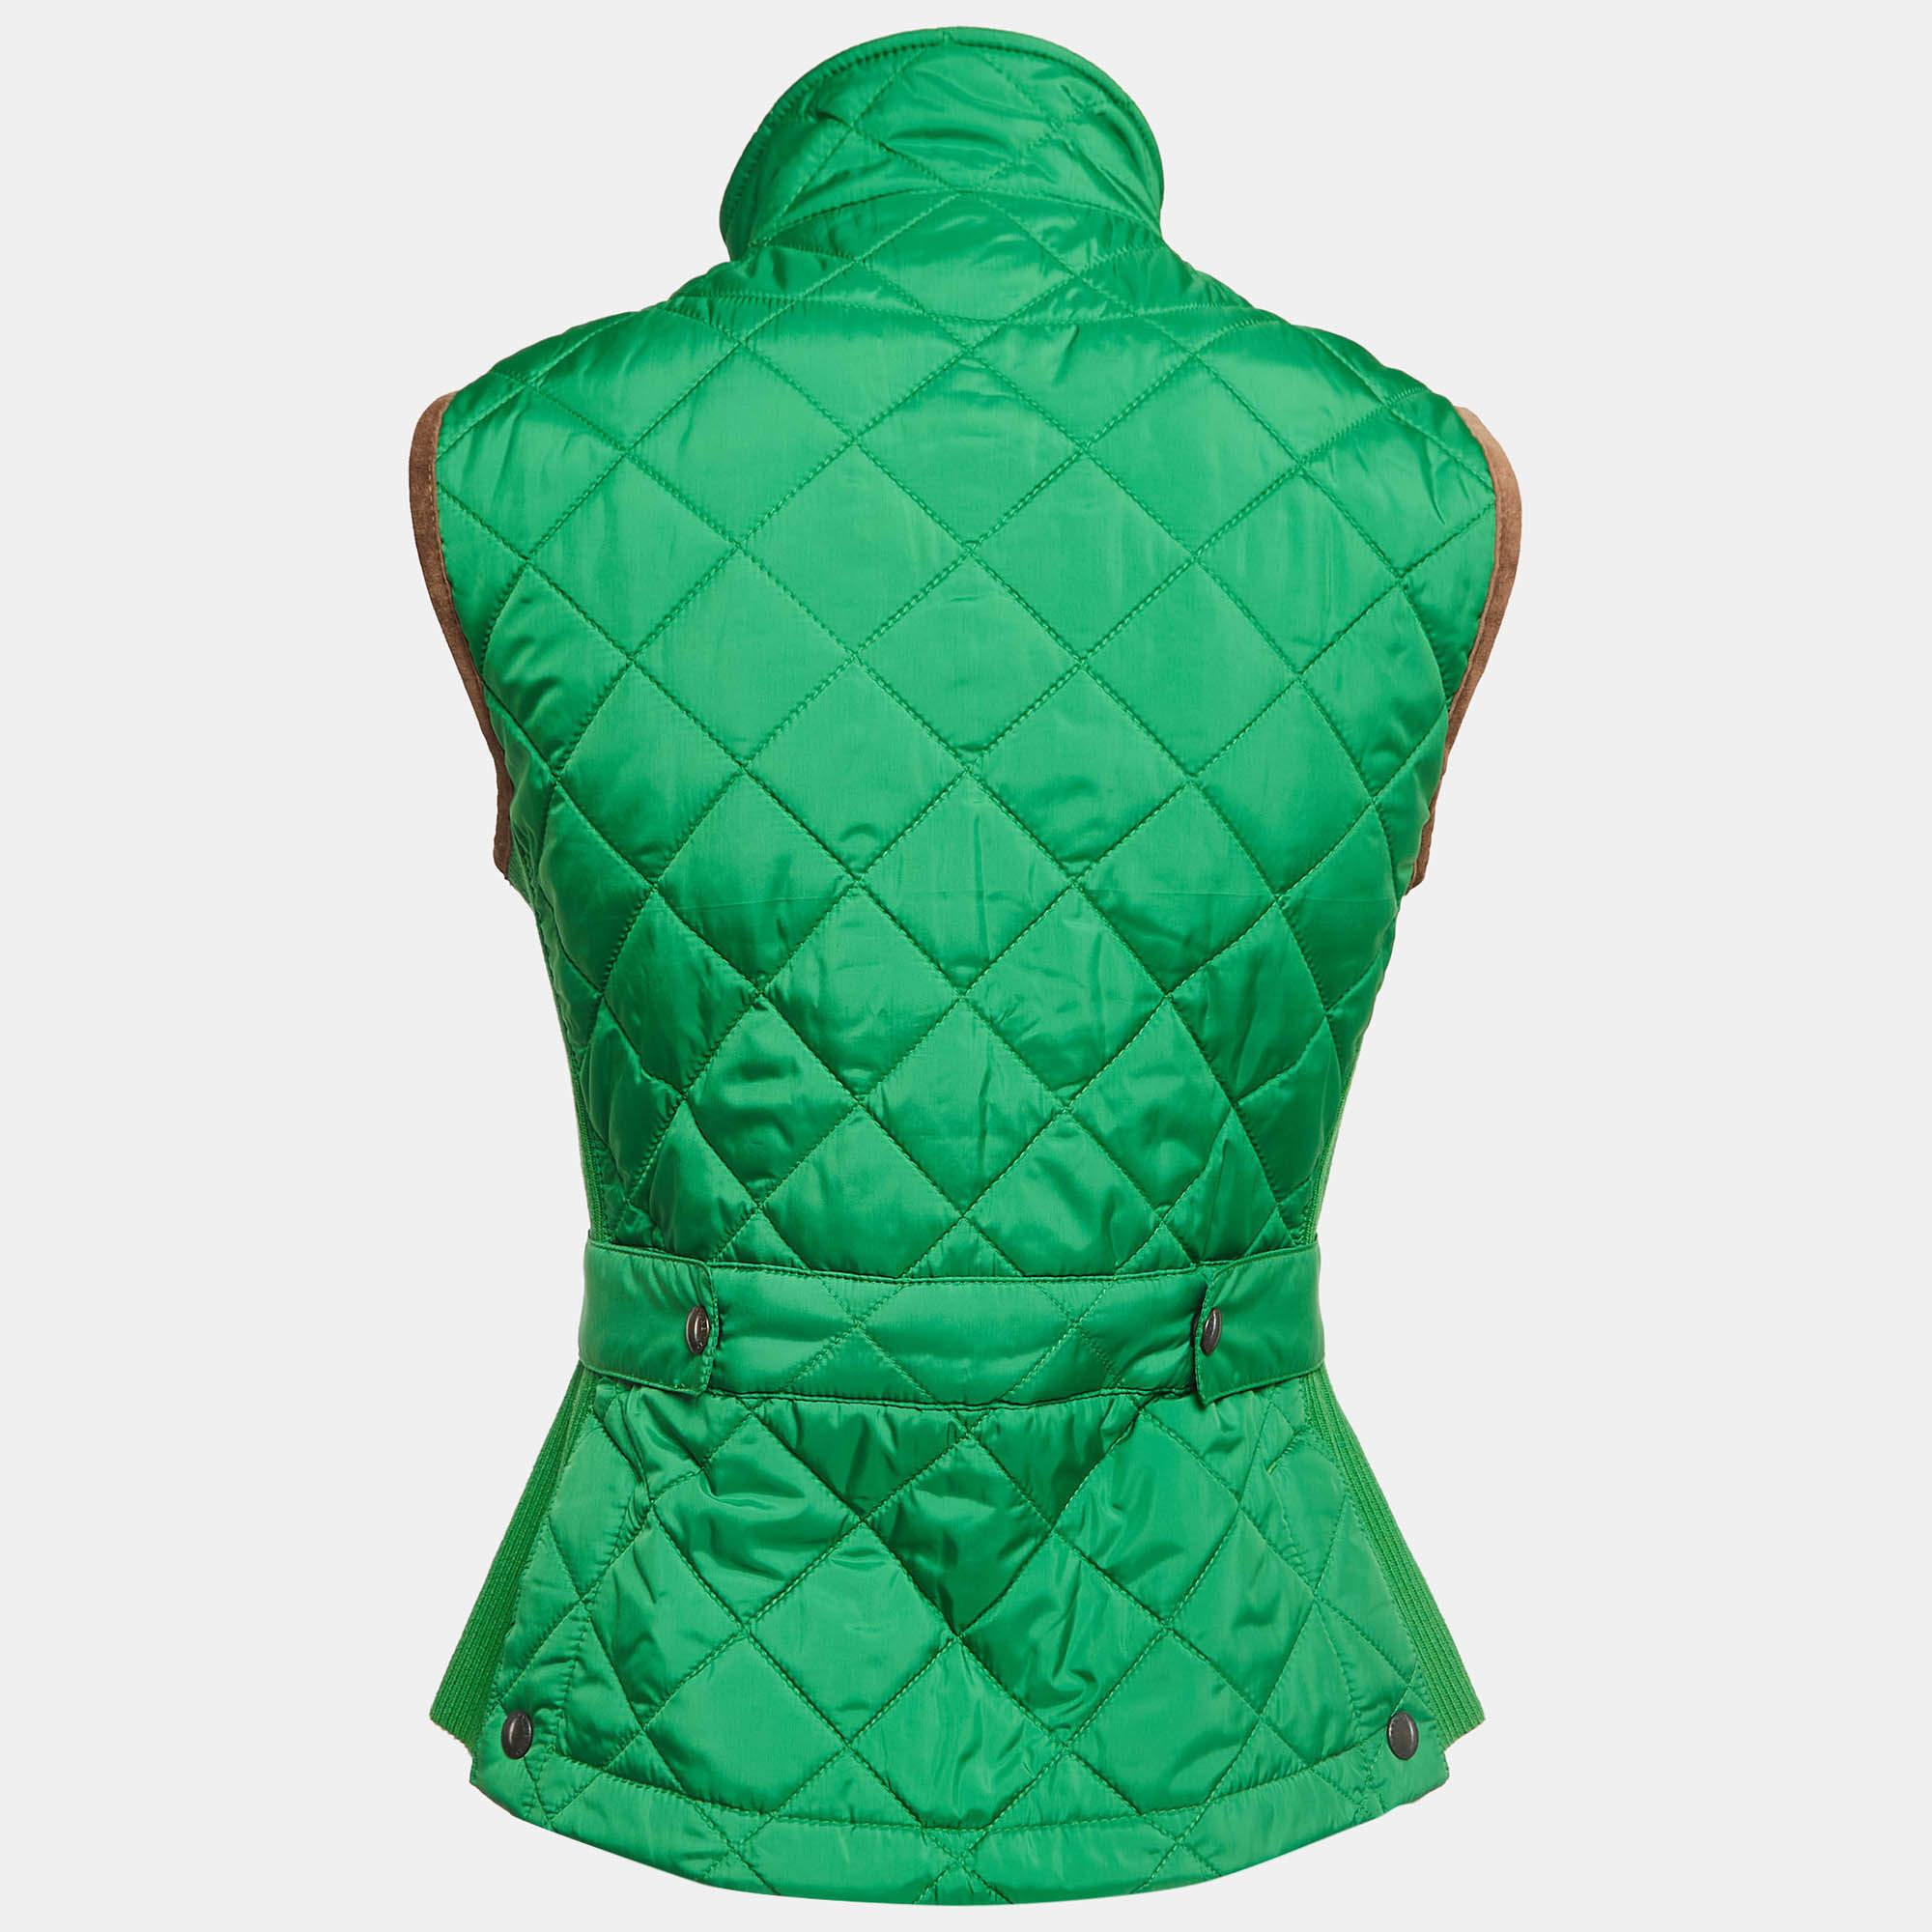 Immerse yourself in the vibrant charm of the Ralph Lauren Sport vest. Crafted with meticulous attention, this vest boasts a green hue, adorned with exquisite embroidery and sleek suede trim, offering both style and functionality for your outdoor